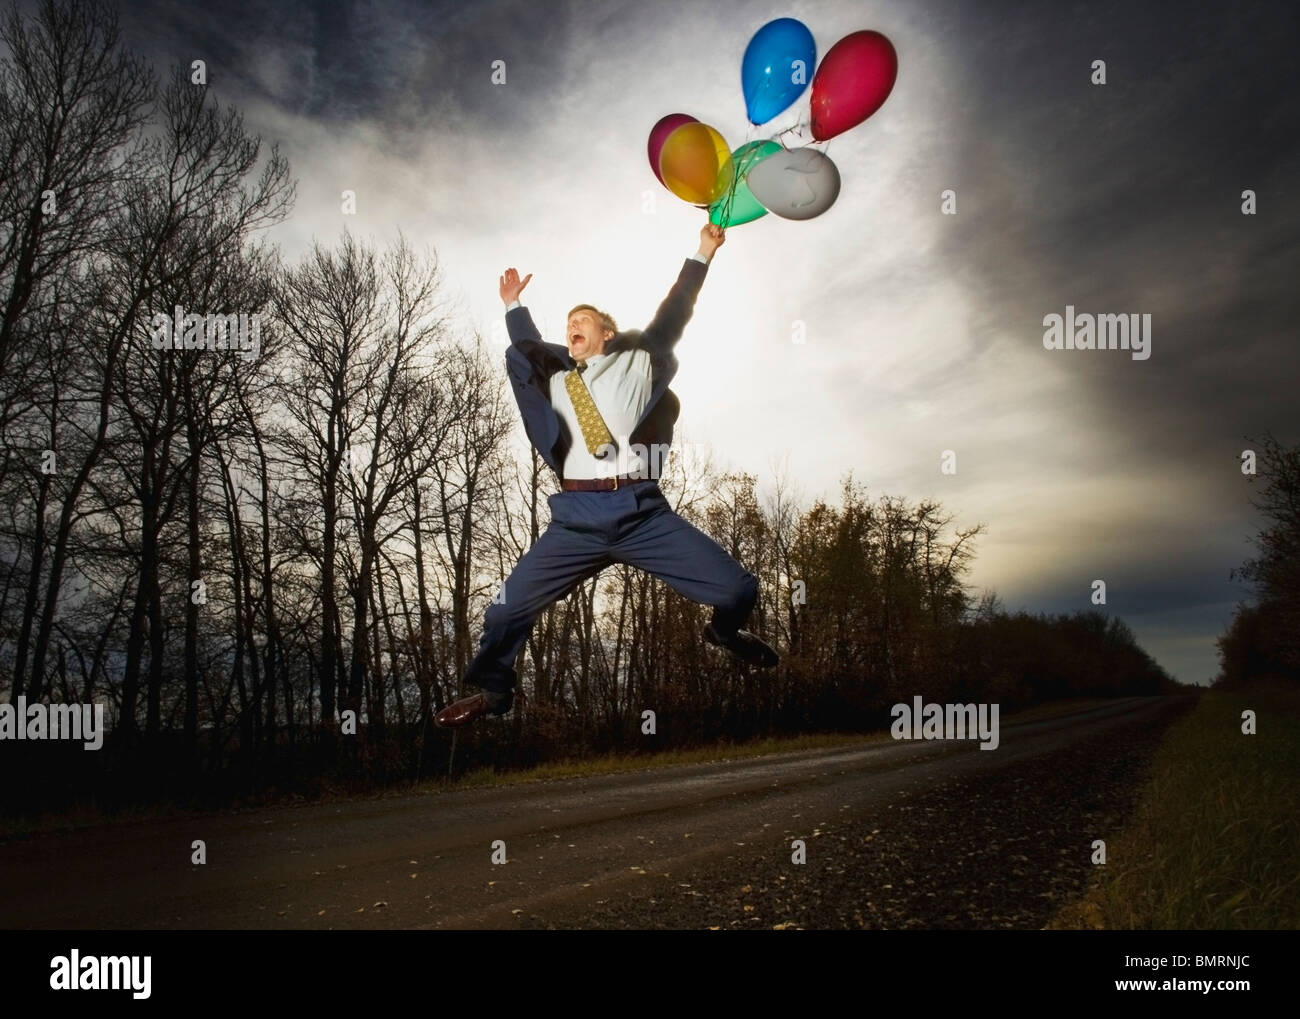 Alberta, Canada; A Businessman Jumping In The Air On The Side Of The Road Holding Balloons Stock Photo